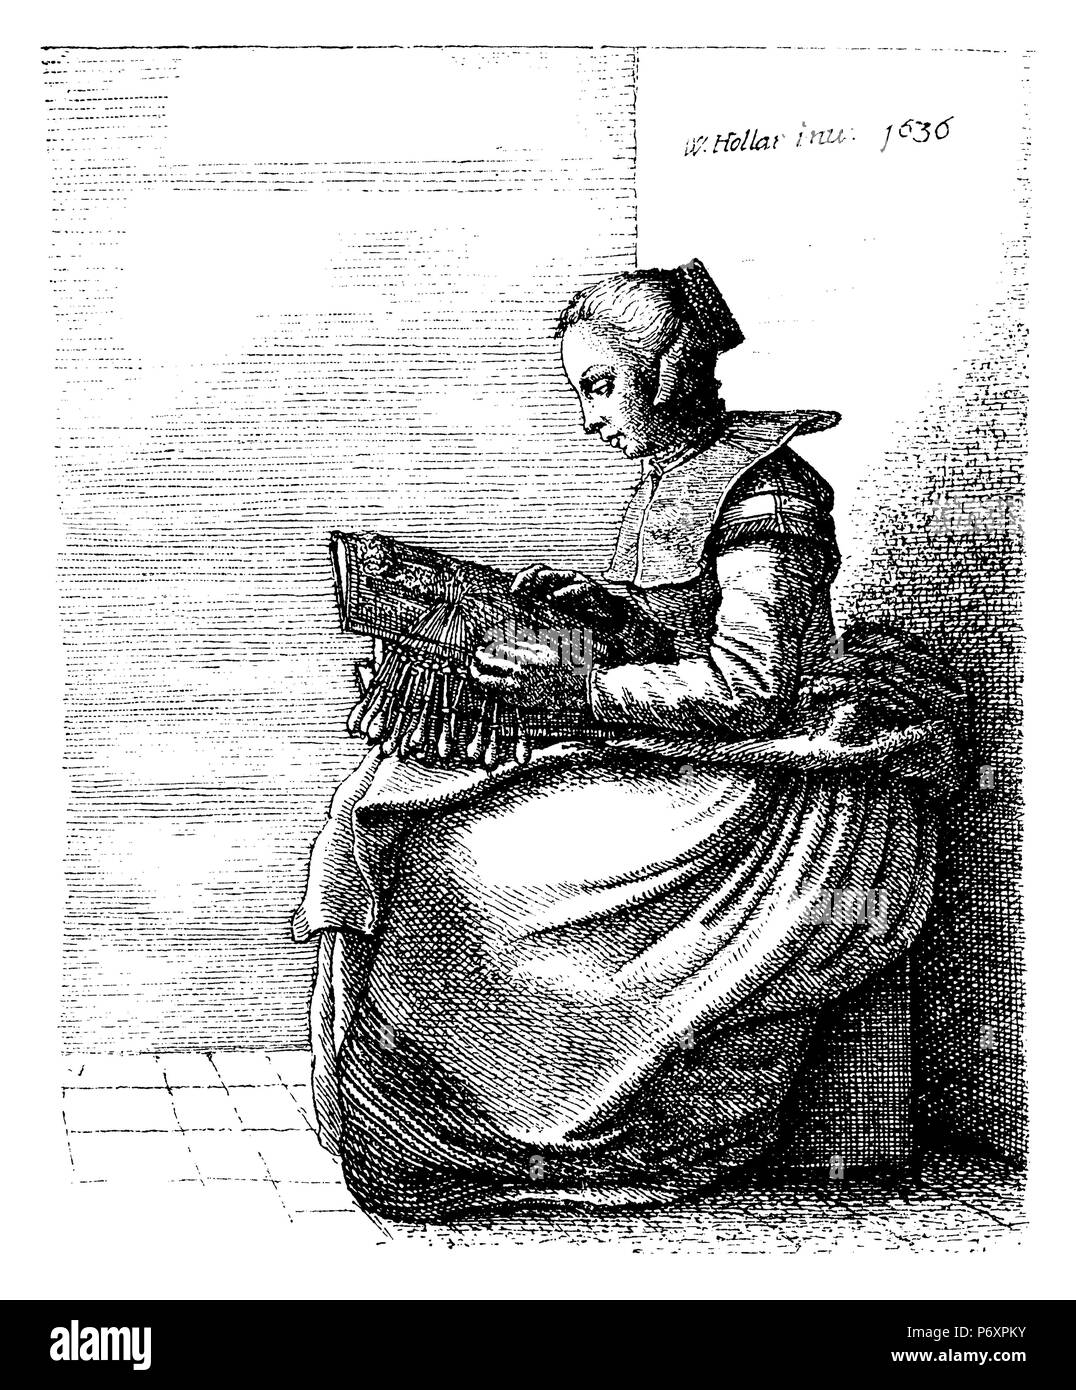 Lacemaker. Etching by Wenzel Hollar, 1636, Wenzel Hollar  1893 Stock Photo